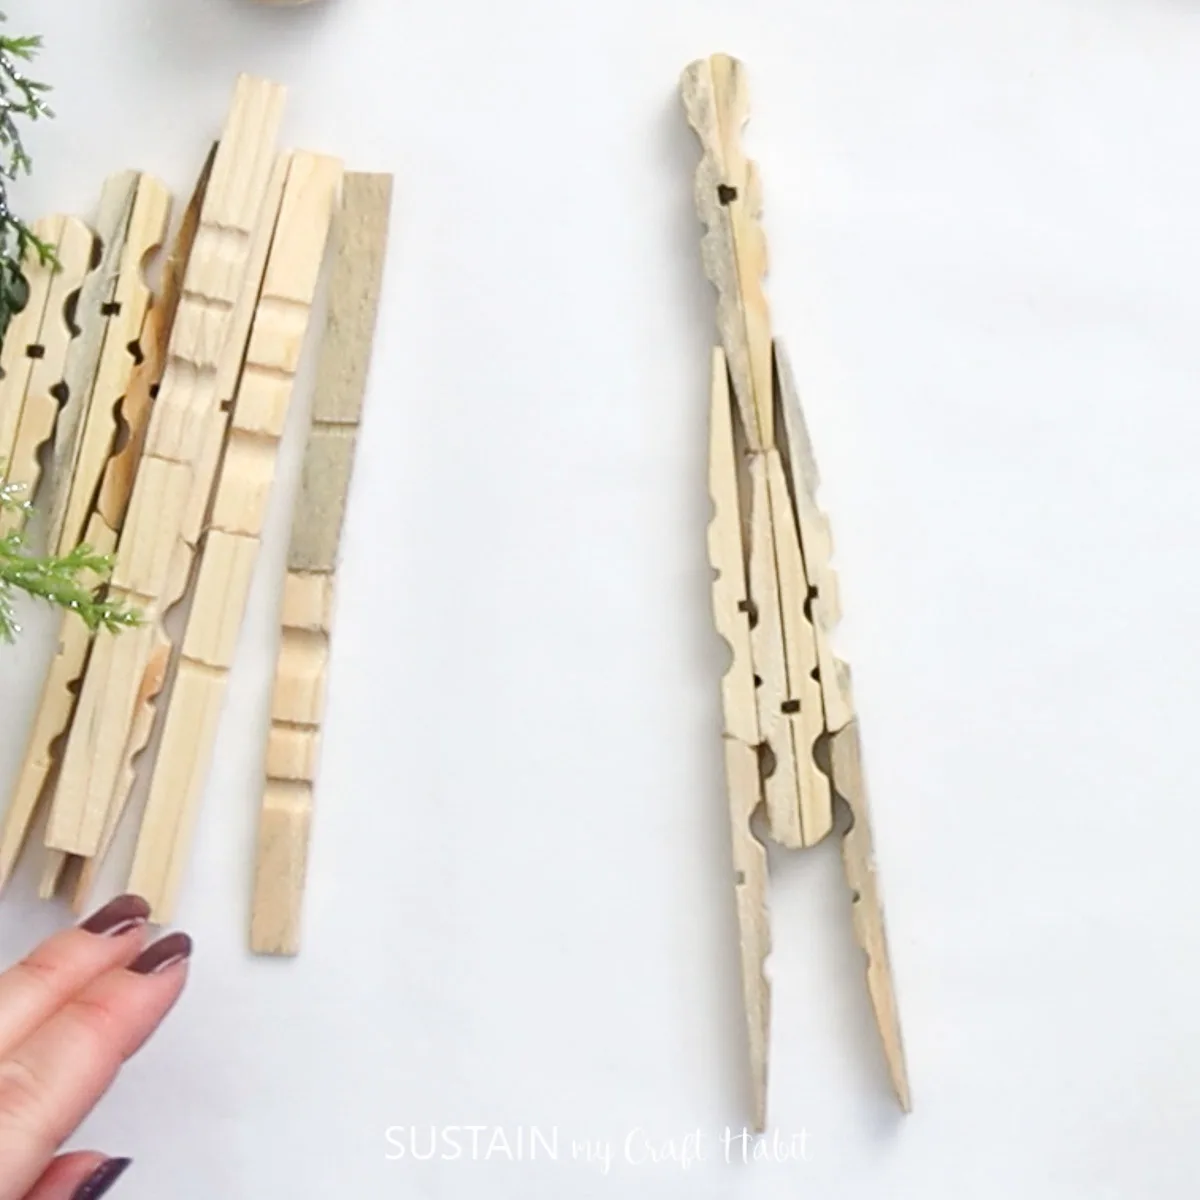 Gluing clothespins together to form an angel body.